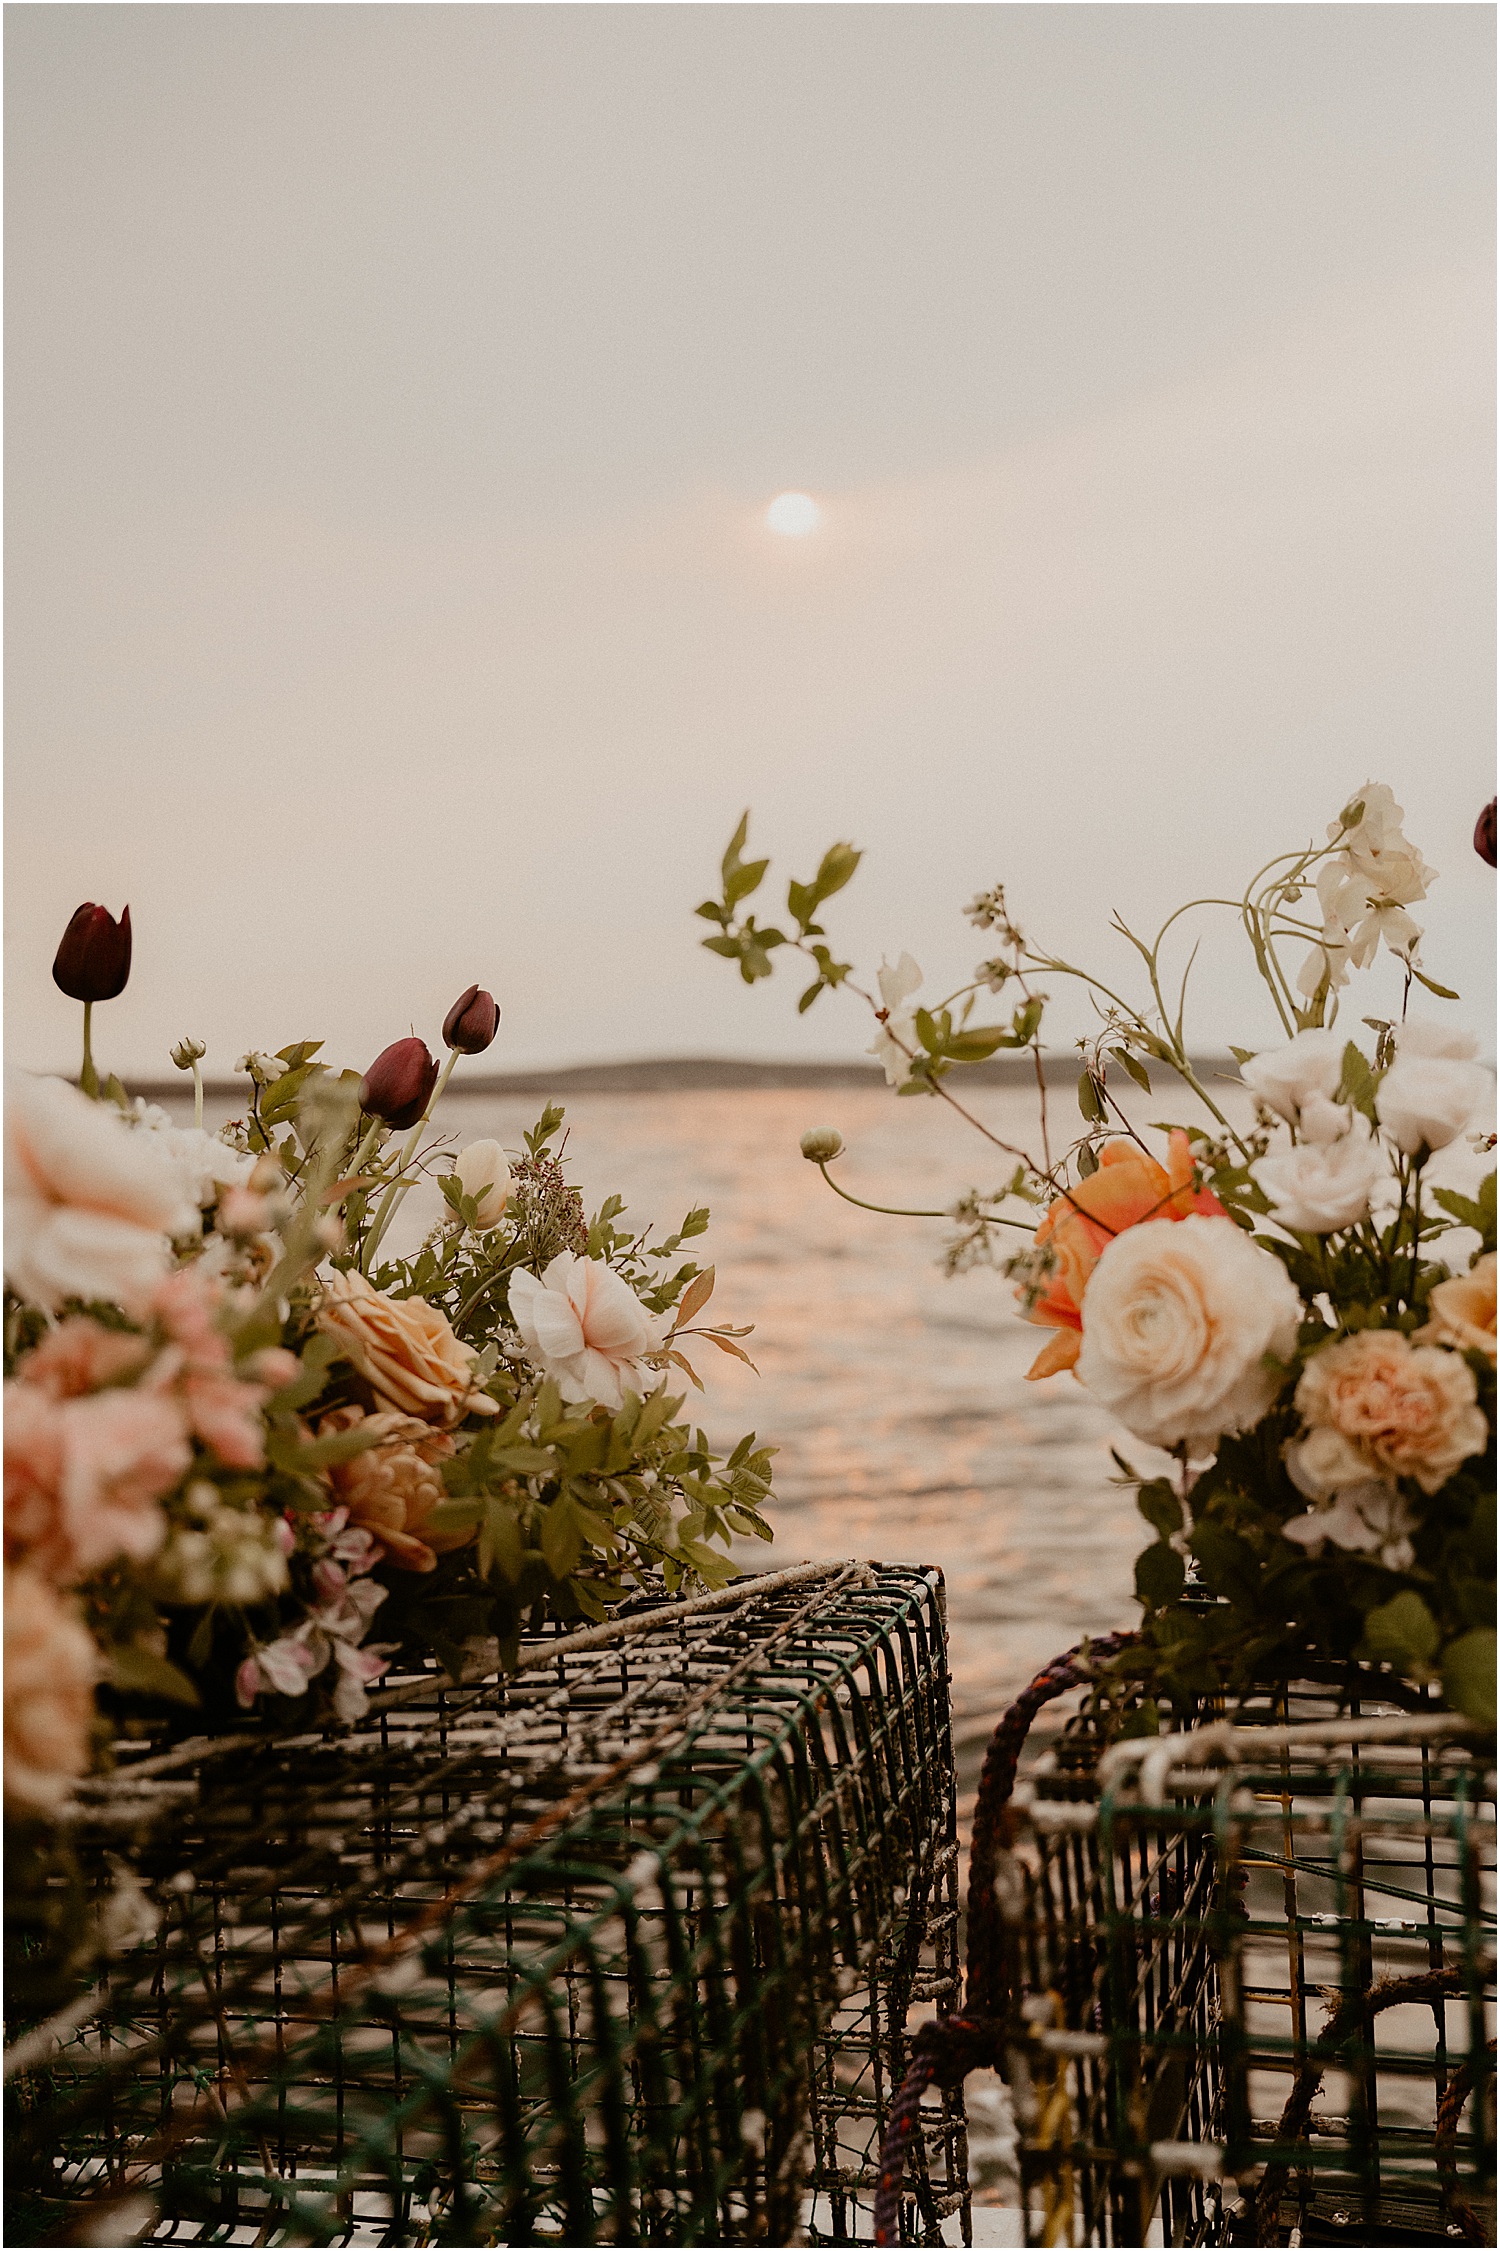 Stunning florals by Katelyn Mallett Photography